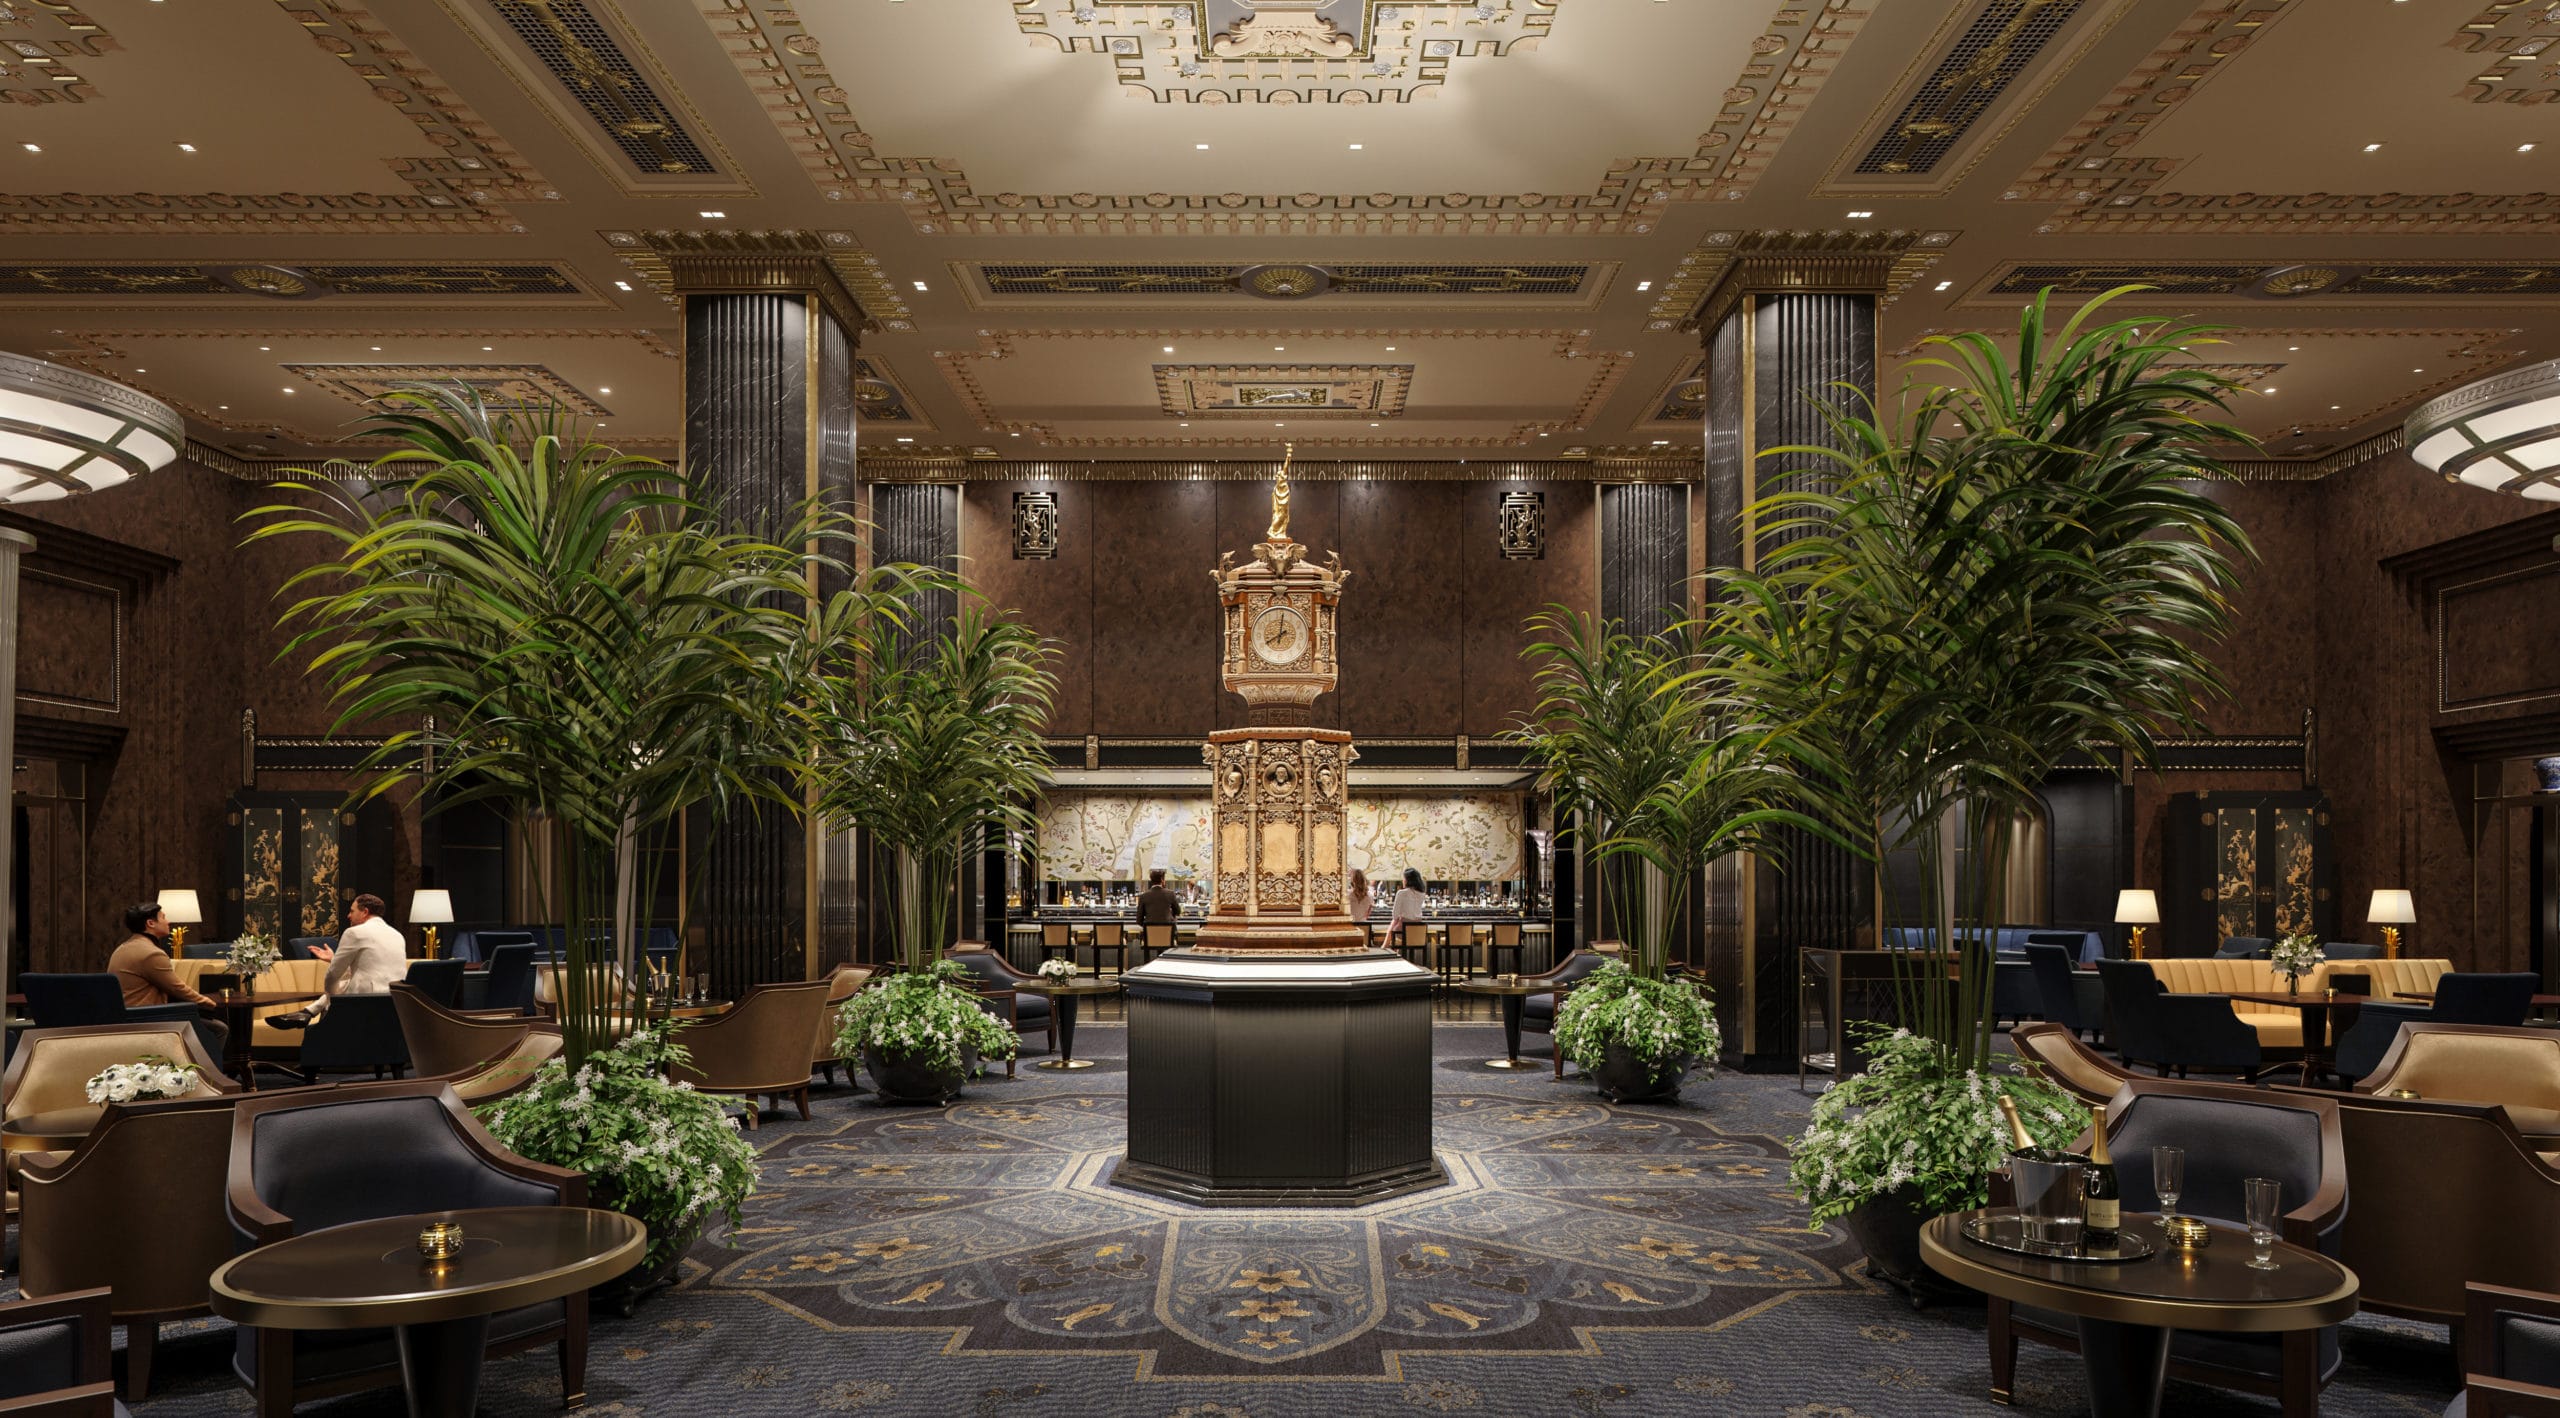 Rendering of reimagined clock in main lobby at the Waldorf-Astoria New York 5-star hotel.